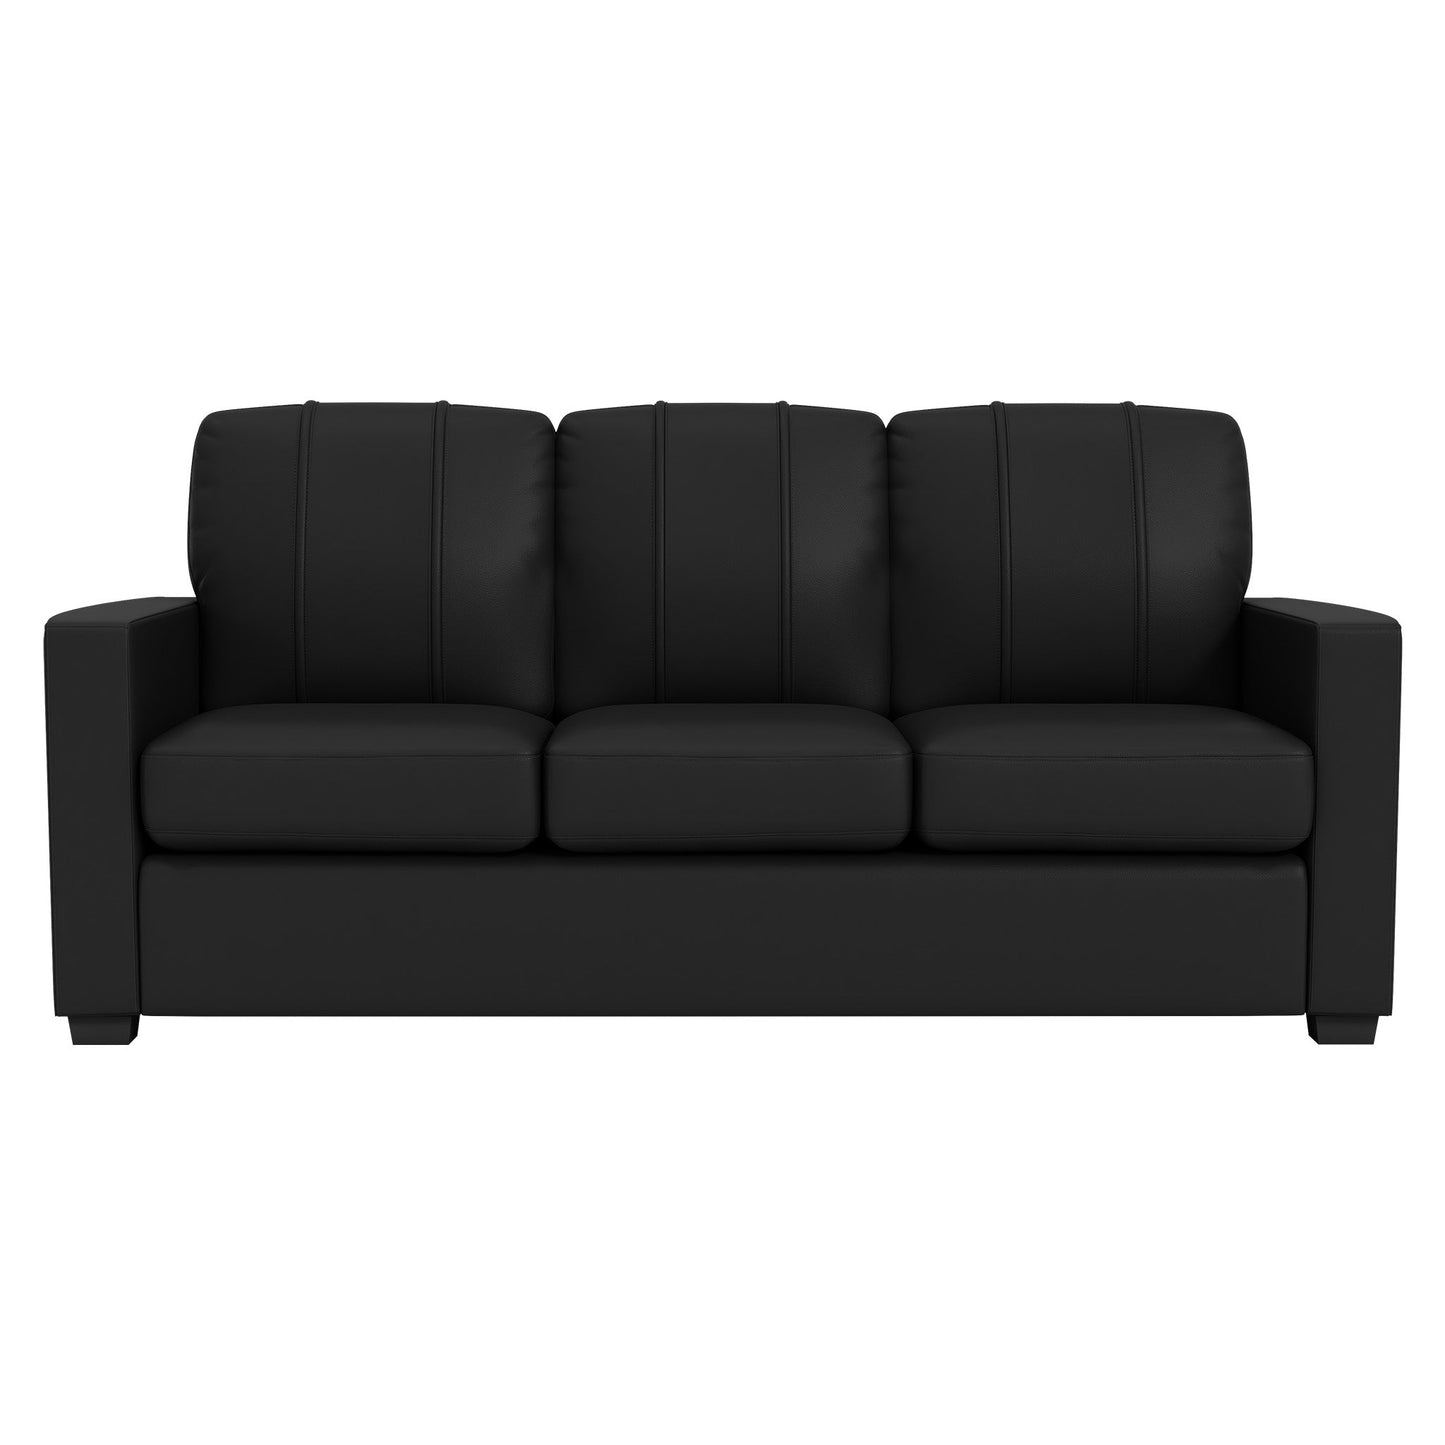 Silver Sofa with San Francisco Giants Champs'14